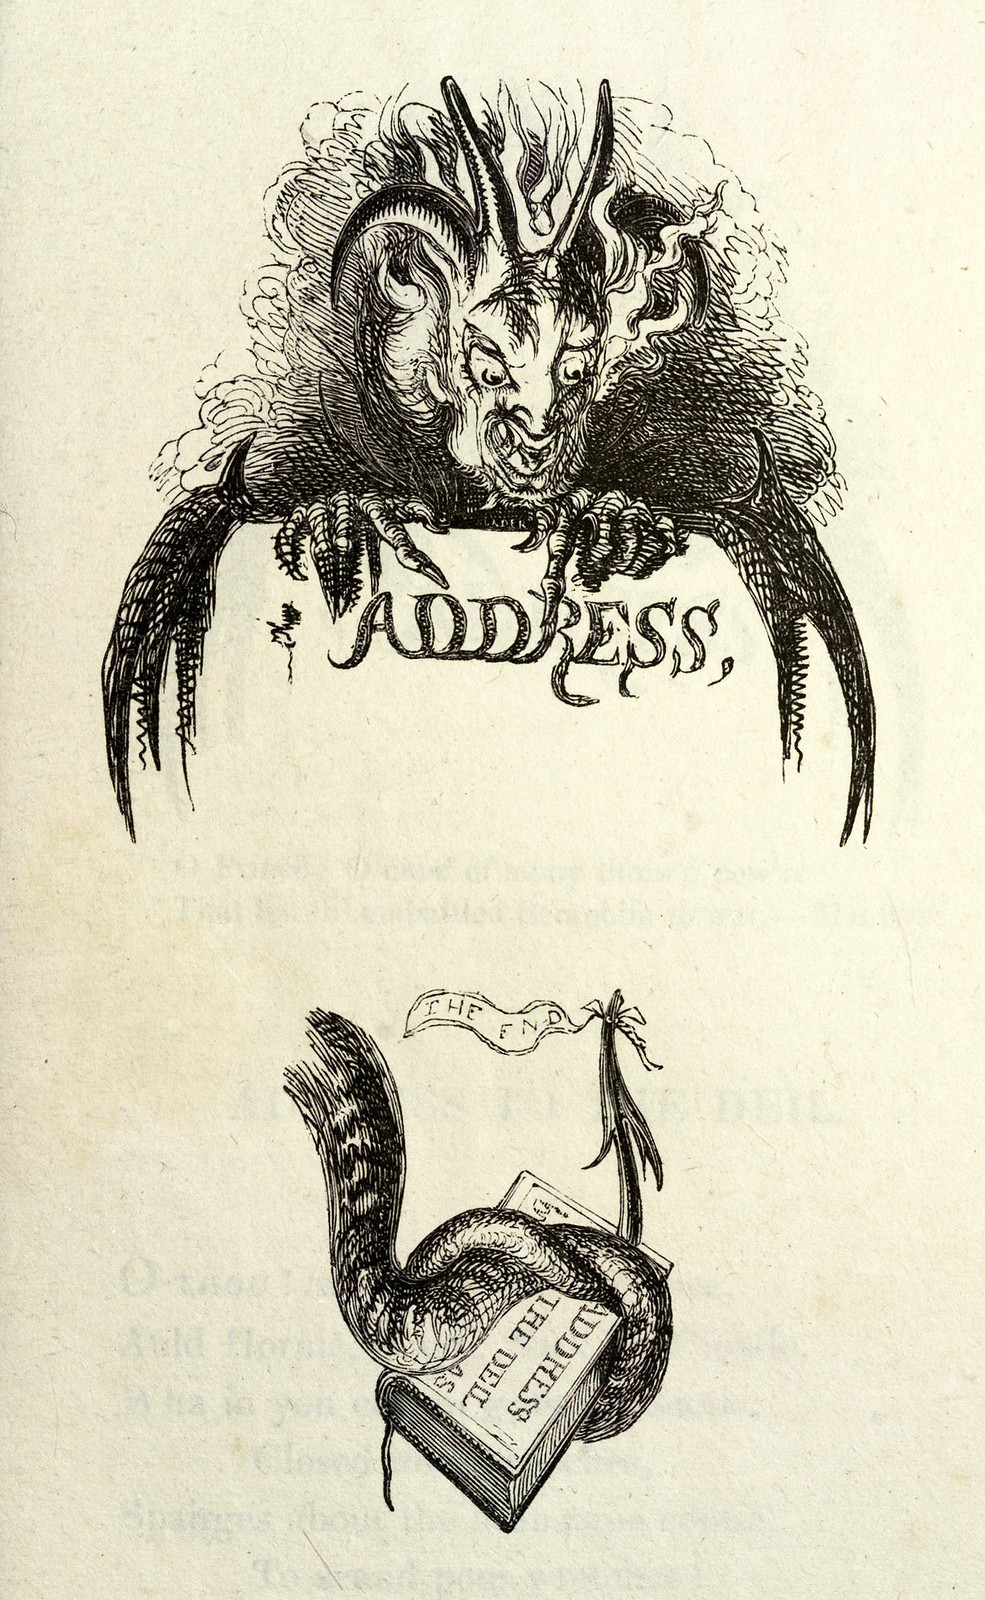 Thomas Landseer - Illustrations from "Tam O'Shanter and Souter Johnny, A Poem," by Robert Burns, 1830 (2)